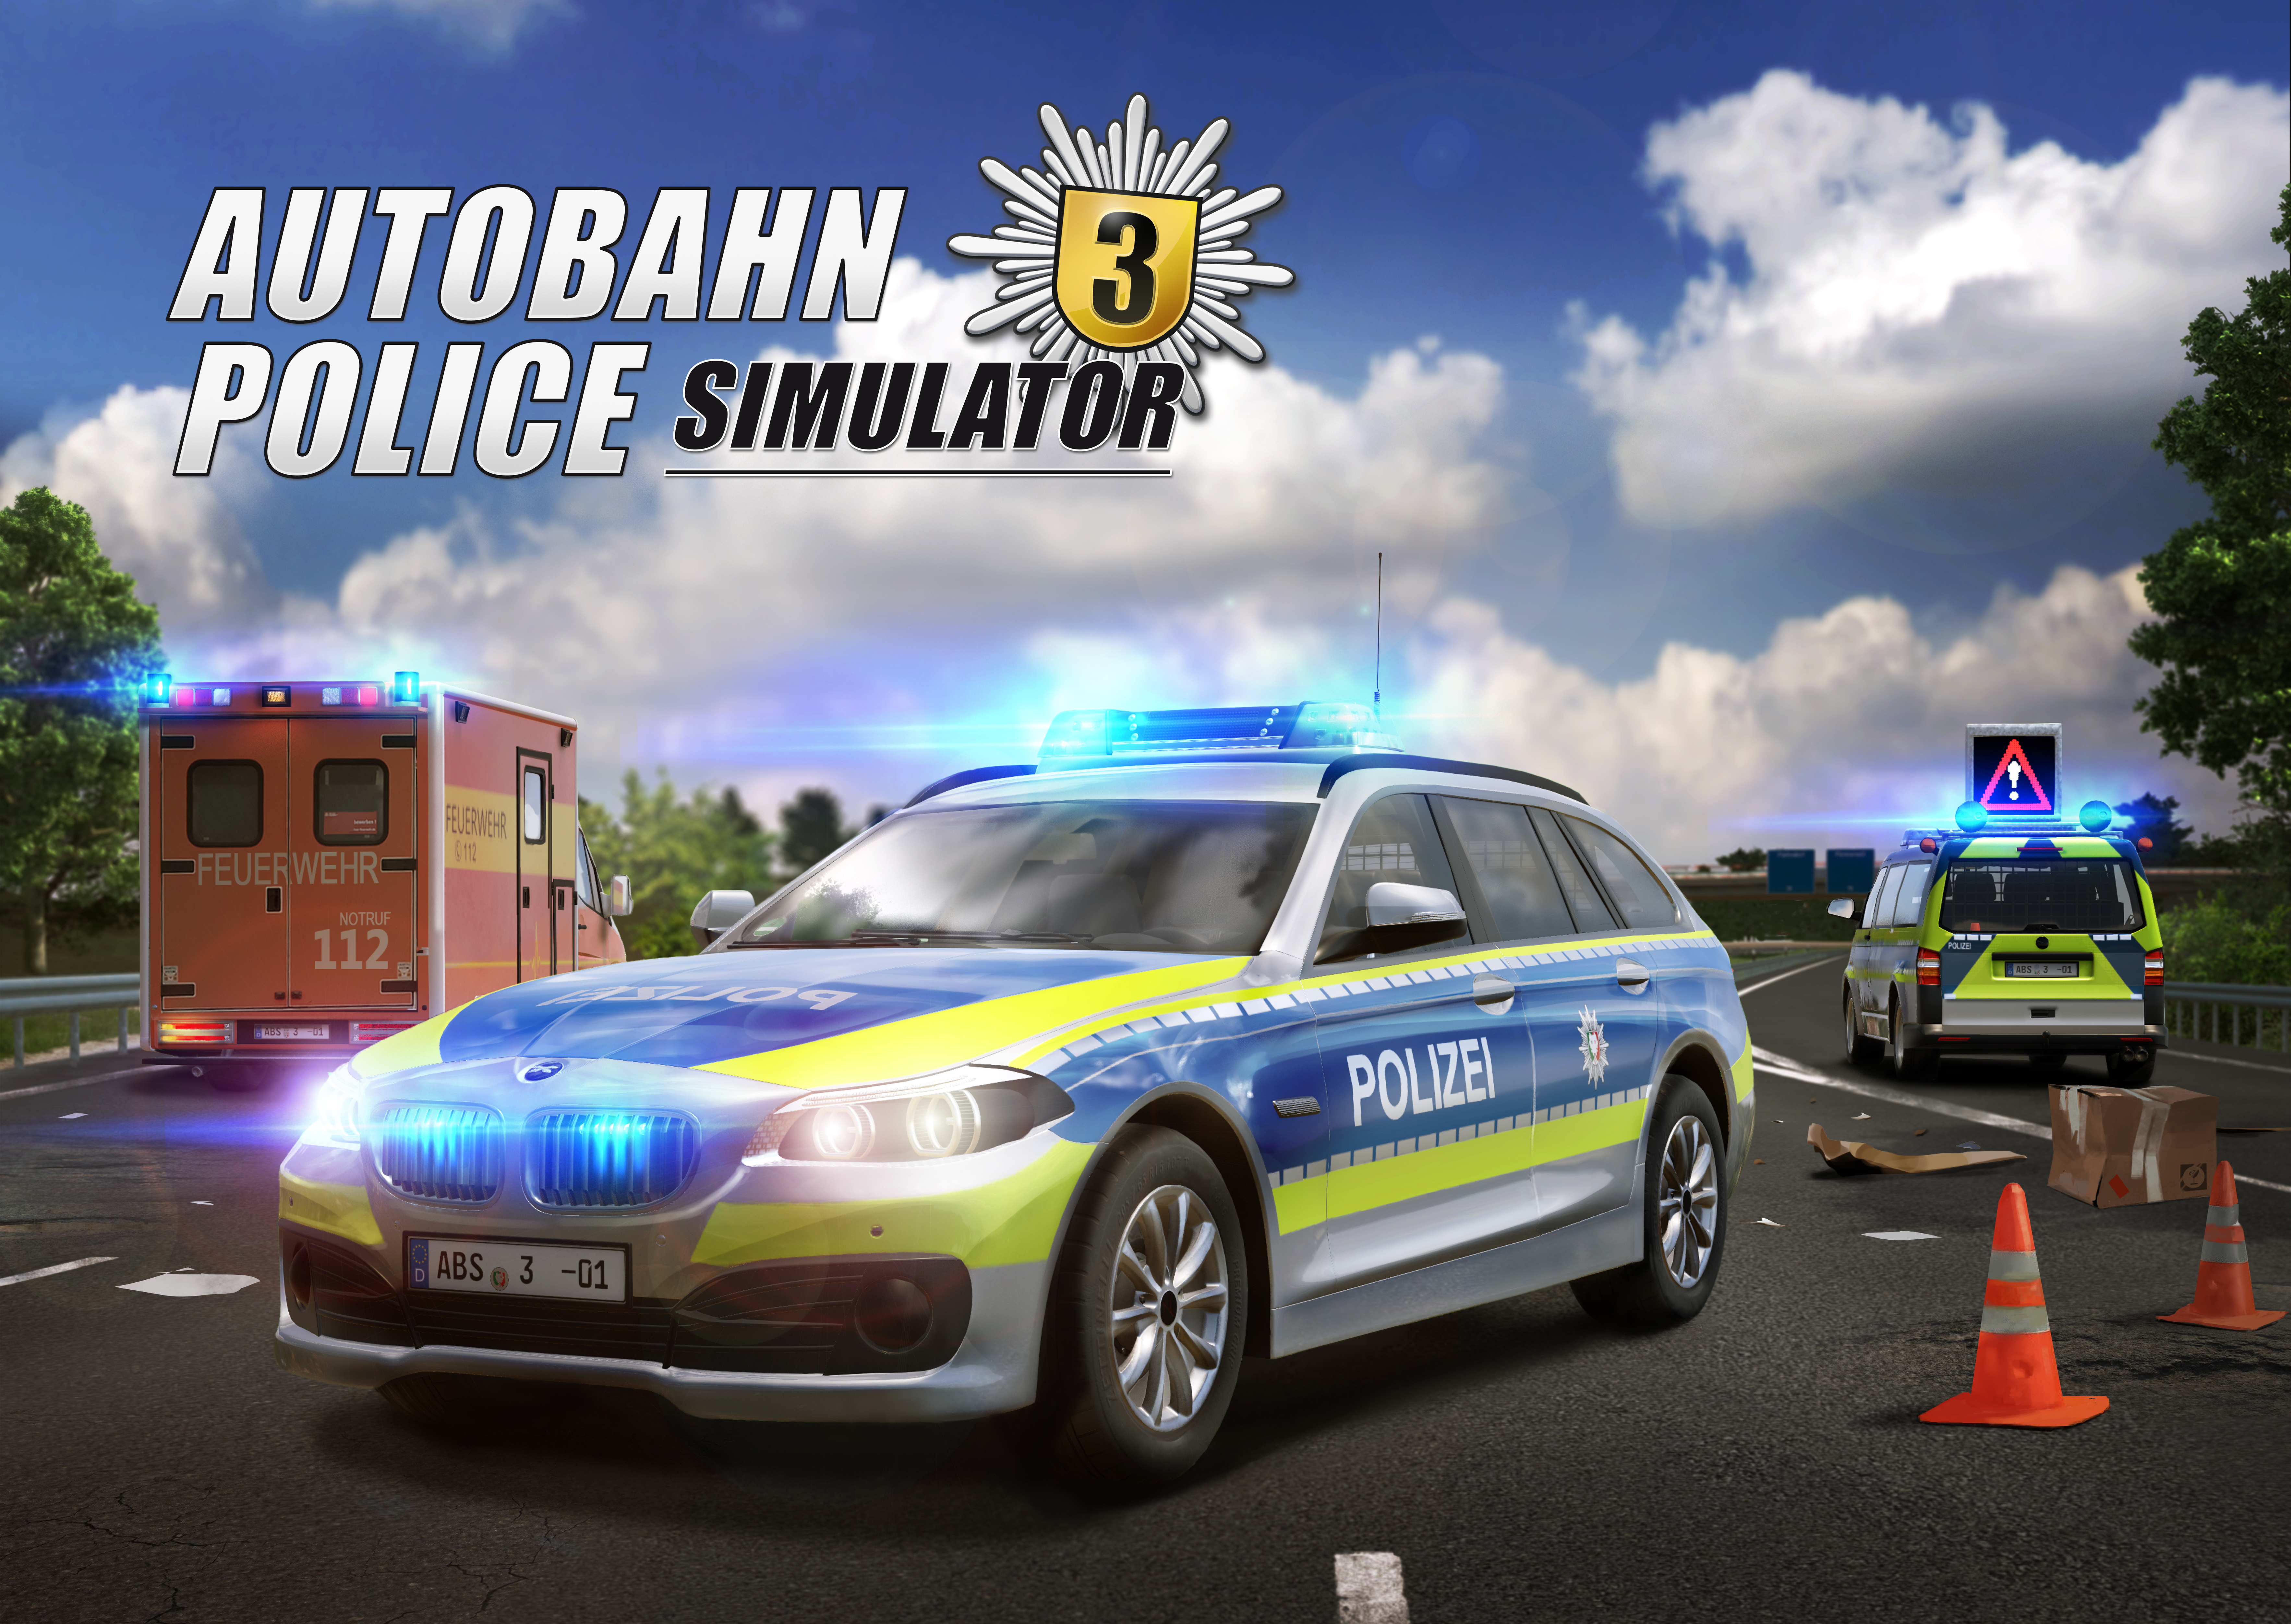 autobahn-police-simulator-3-will-be-released-on-june-23-for-pc-and-current-xbox-and-playstation-consoles